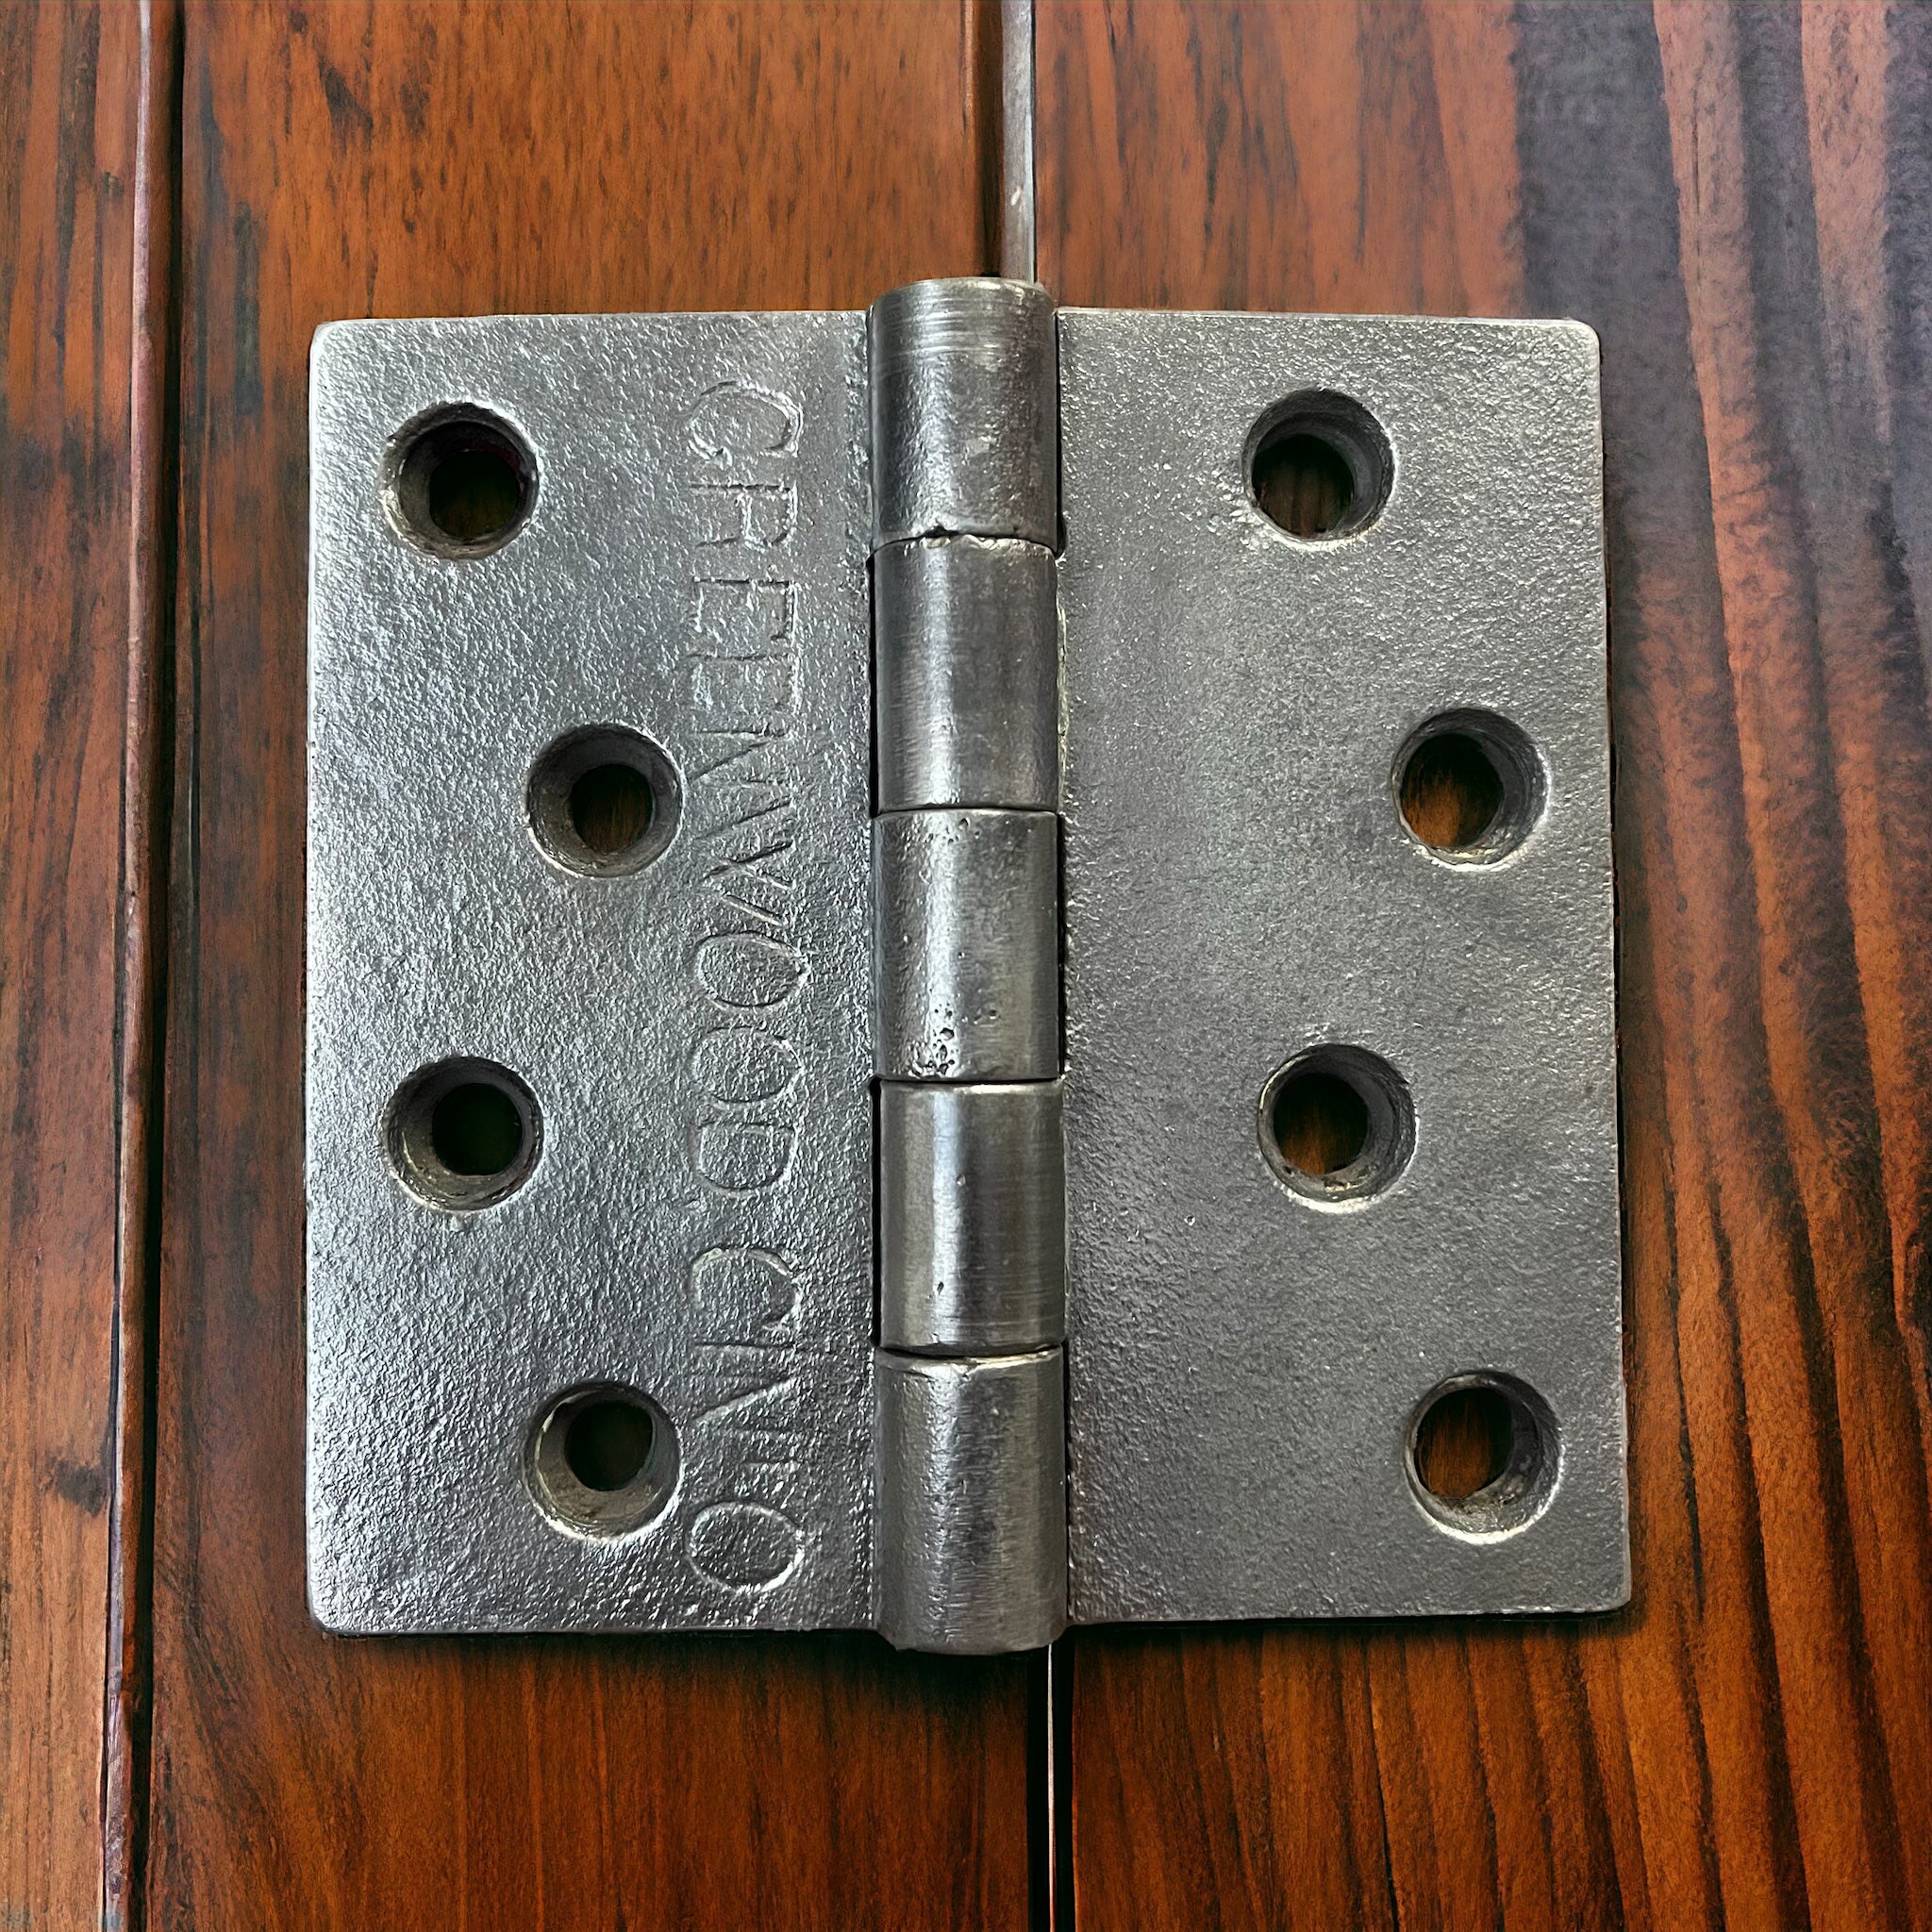 Antique Cast Iron Butt Hinges Made By Greenwood Mfg., Patented 1858